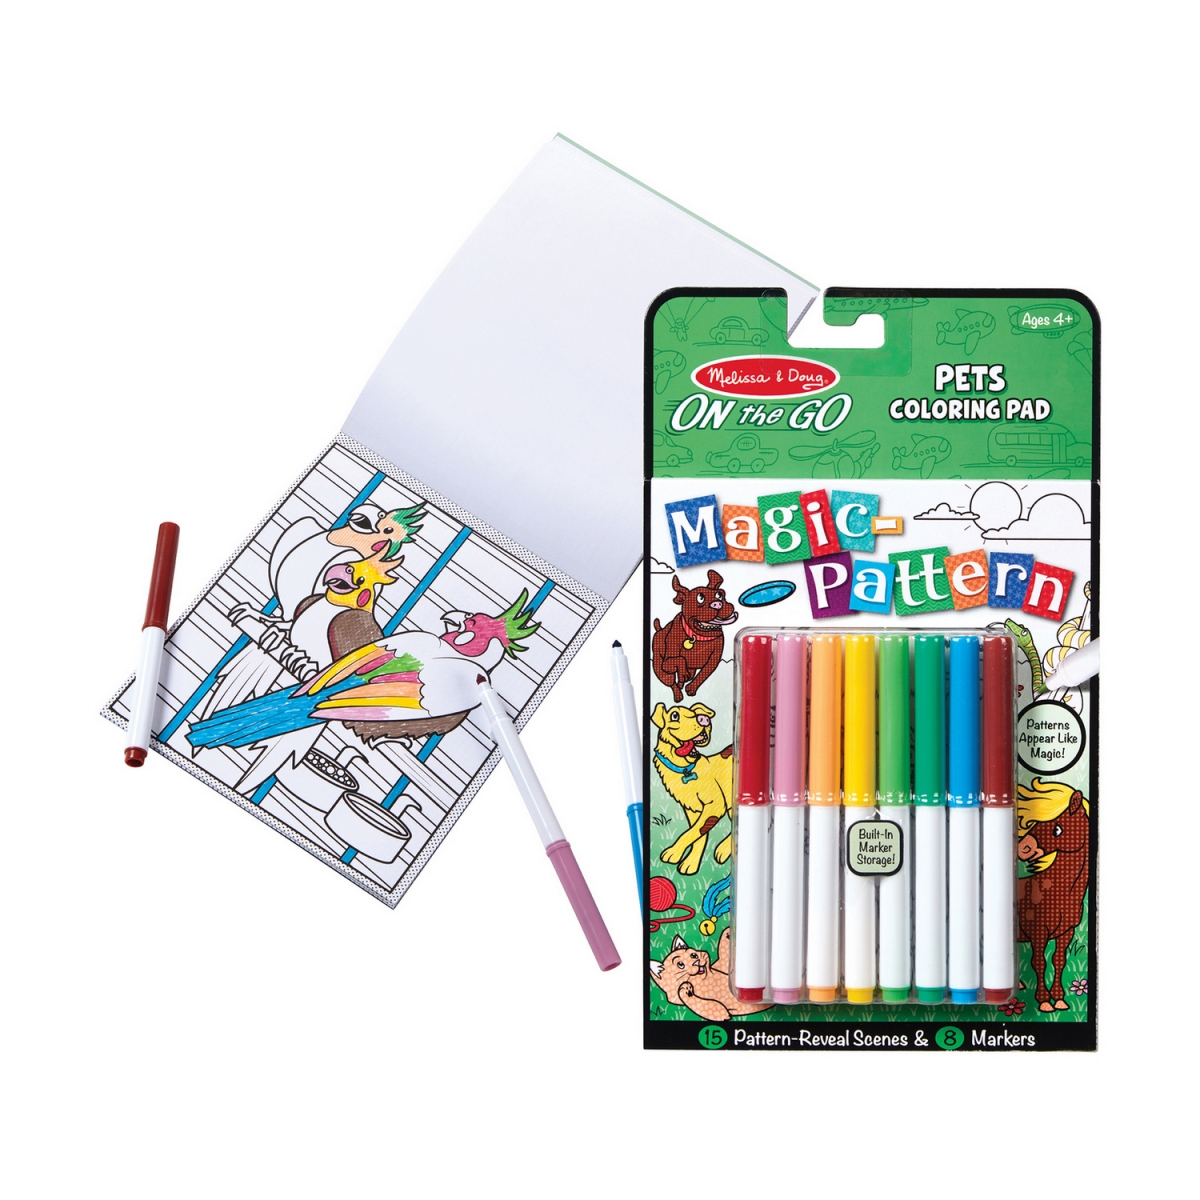 Picture of Melissa & Doug 30311 On the Go Magic-Pattern Coloring Pad - Pets